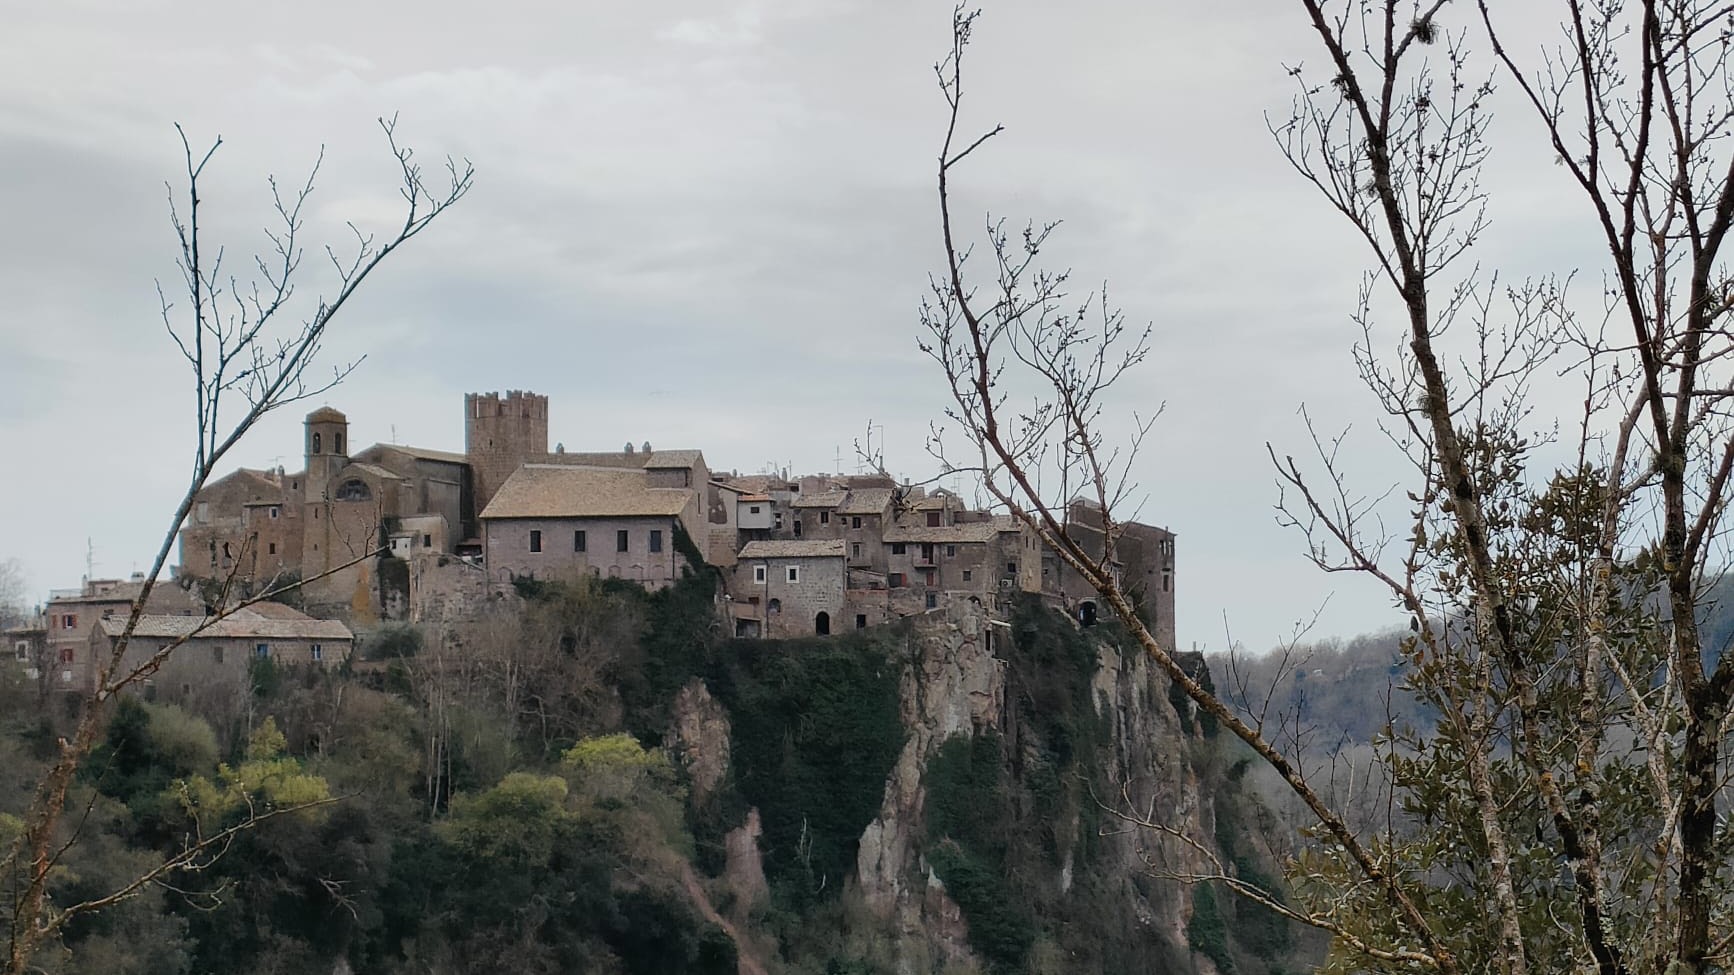 Calcata is a historic town perched on a cliff about an hour's drive from Rome. /CGTN